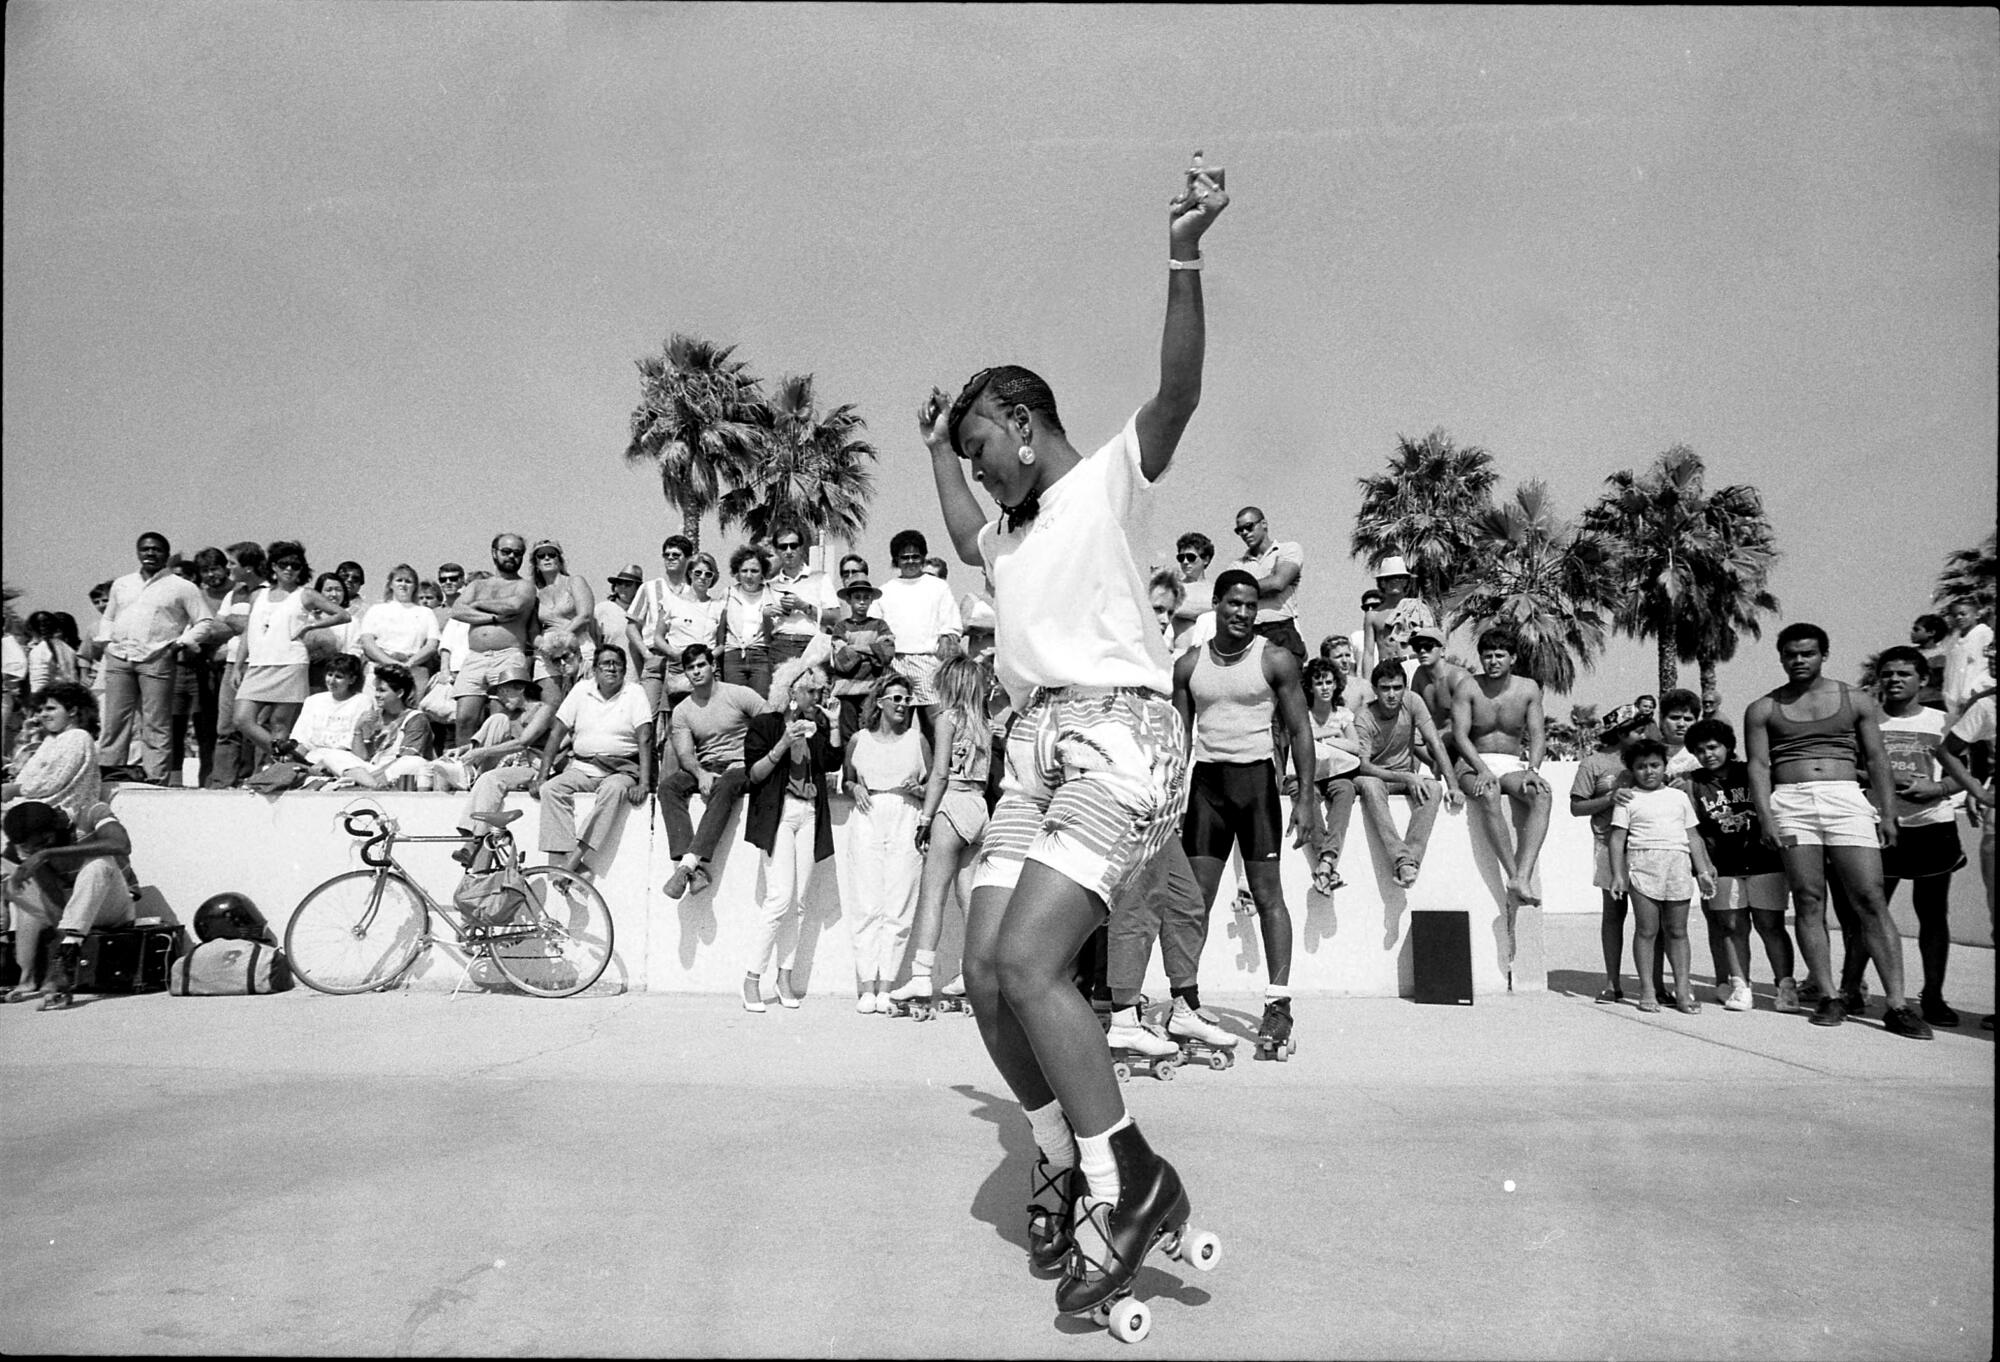 A roller skater performs for a crowd at Venice Beach in 1986.